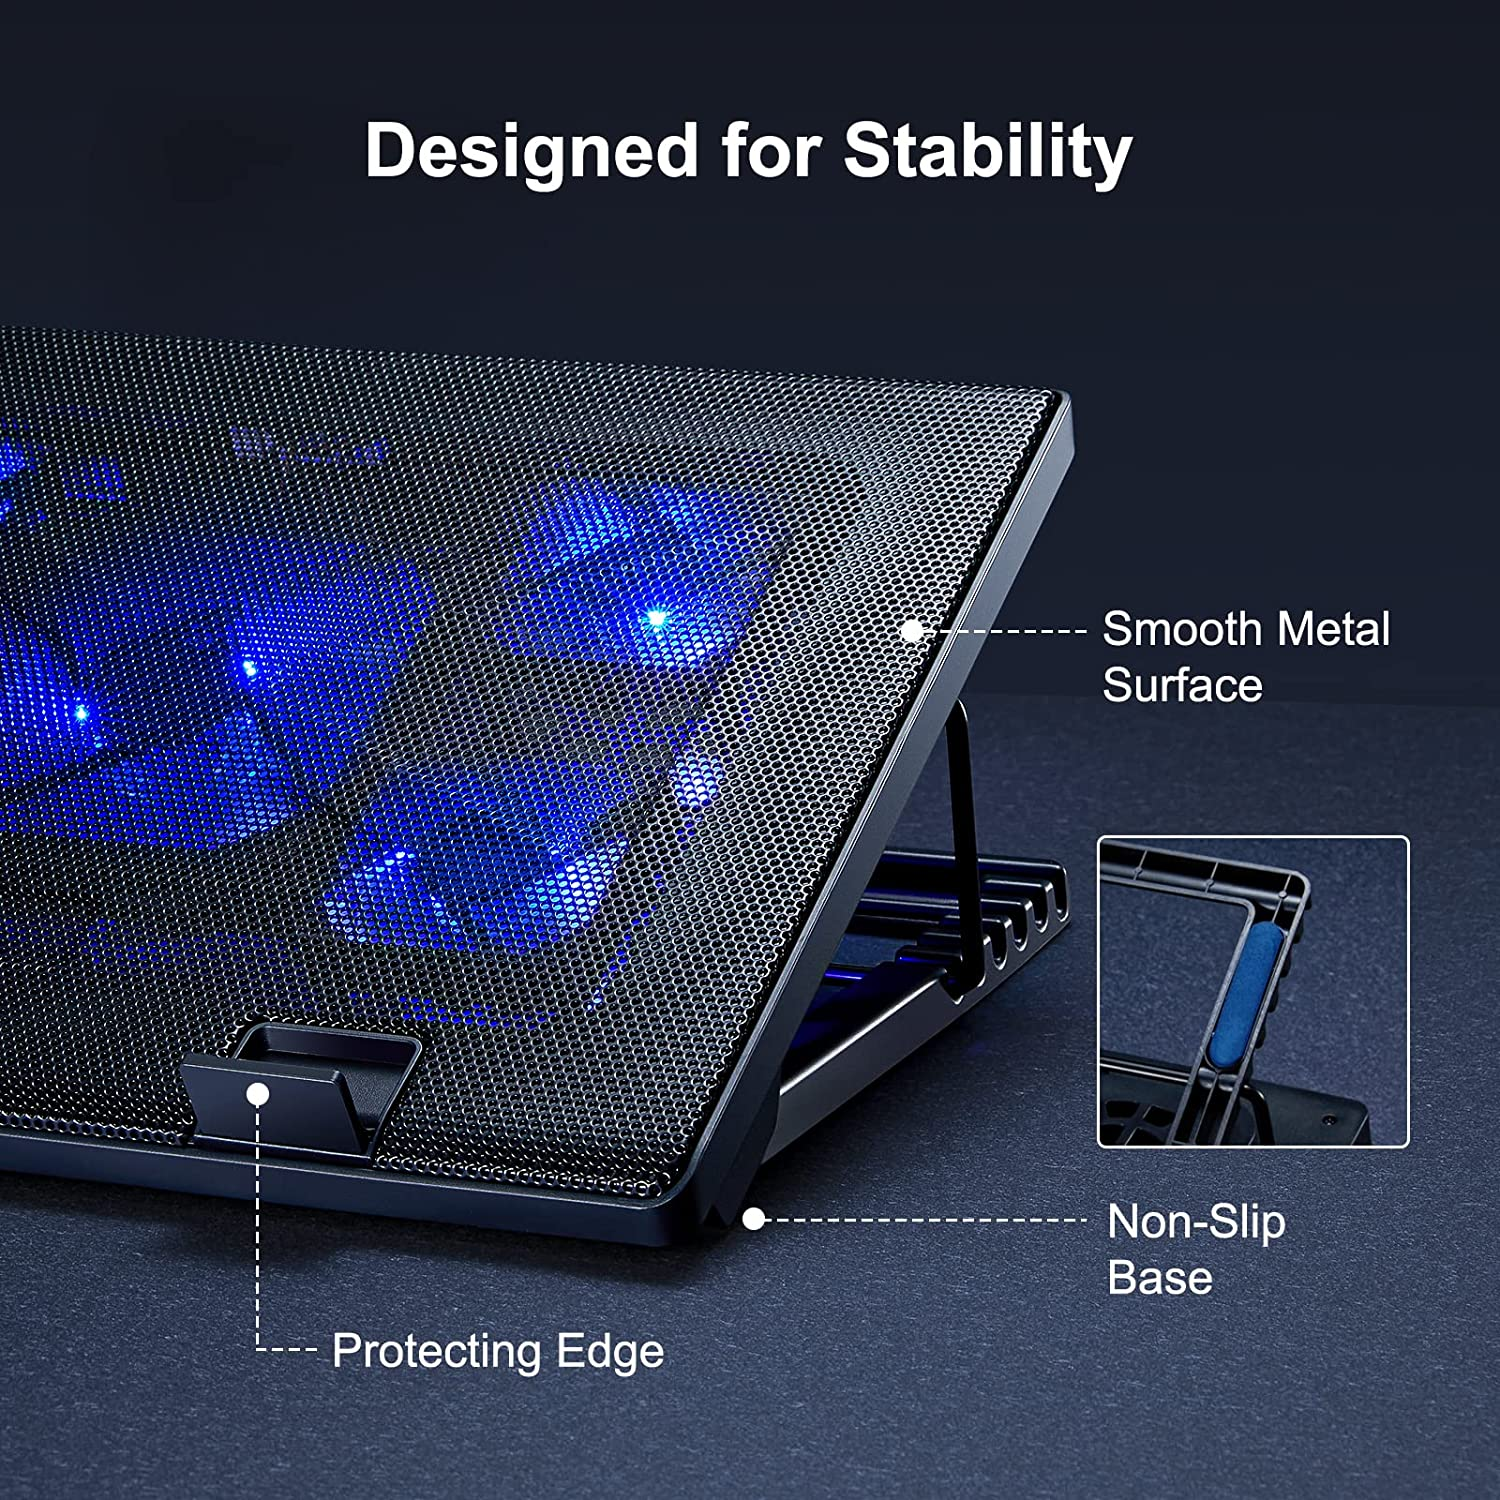 AMERIERGO Laptop Cooling Pad, Adjustable Laptop Cooler Stand with 5 Quiet Blue LED Fans, Laptop Cooling Fan for 10''-19'' Gaming Laptop, Computer Cooling Pad with 2 USB Ports and 1 Cable